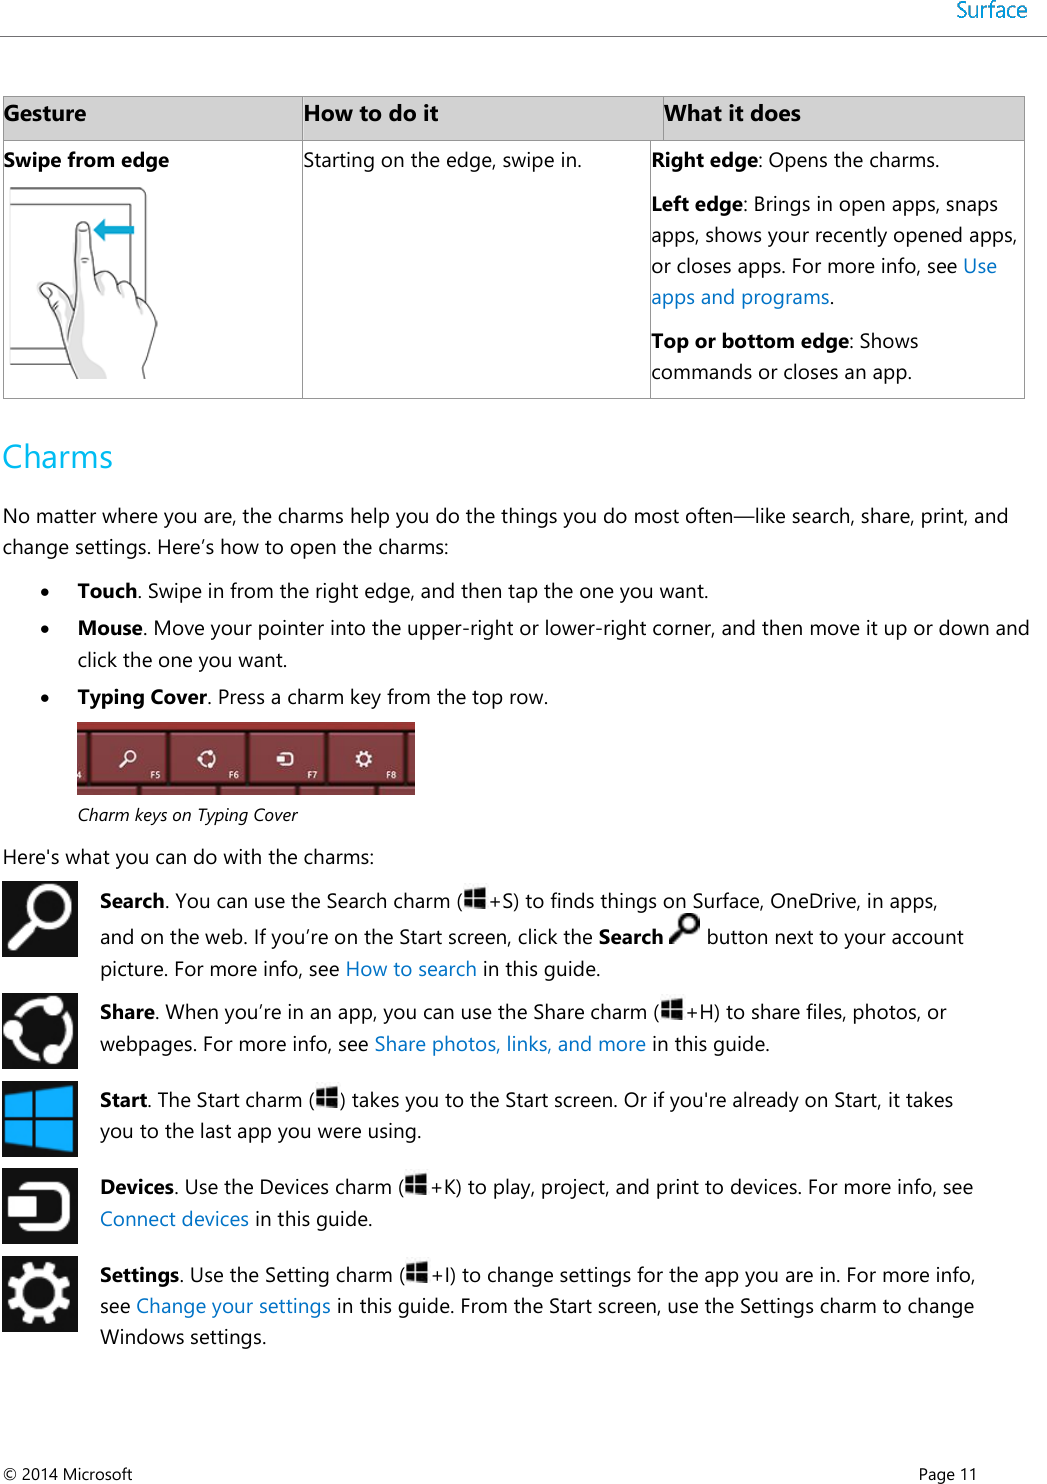  © 2014 Microsoft      Page 11  Gesture How to do it What it does Swipe from edge  Starting on the edge, swipe in. Right edge: Opens the charms.  Left edge: Brings in open apps, snaps apps, shows your recently opened apps, or closes apps. For more info, see Use apps and programs.  Top or bottom edge: Shows commands or closes an app.  Charms No matter where you are, the charms help you do the things you do most often—like search, share, print, and change settings. Here’s how to open the charms:   Touch. Swipe in from the right edge, and then tap the one you want.  Mouse. Move your pointer into the upper-right or lower-right corner, and then move it up or down and click the one you want.  Typing Cover. Press a charm key from the top row.   Charm keys on Typing Cover  Here&apos;s what you can do with the charms:  Search. You can use the Search charm ( +S) to finds things on Surface, OneDrive, in apps, and on the web. If you’re on the Start screen, click the Search   button next to your account picture. For more info, see How to search in this guide.   Share. When you’re in an app, you can use the Share charm ( +H) to share files, photos, or webpages. For more info, see Share photos, links, and more in this guide.  Start. The Start charm ( ) takes you to the Start screen. Or if you&apos;re already on Start, it takes you to the last app you were using.   Devices. Use the Devices charm ( +K) to play, project, and print to devices. For more info, see Connect devices in this guide.  Settings. Use the Setting charm ( +I) to change settings for the app you are in. For more info, see Change your settings in this guide. From the Start screen, use the Settings charm to change Windows settings.   